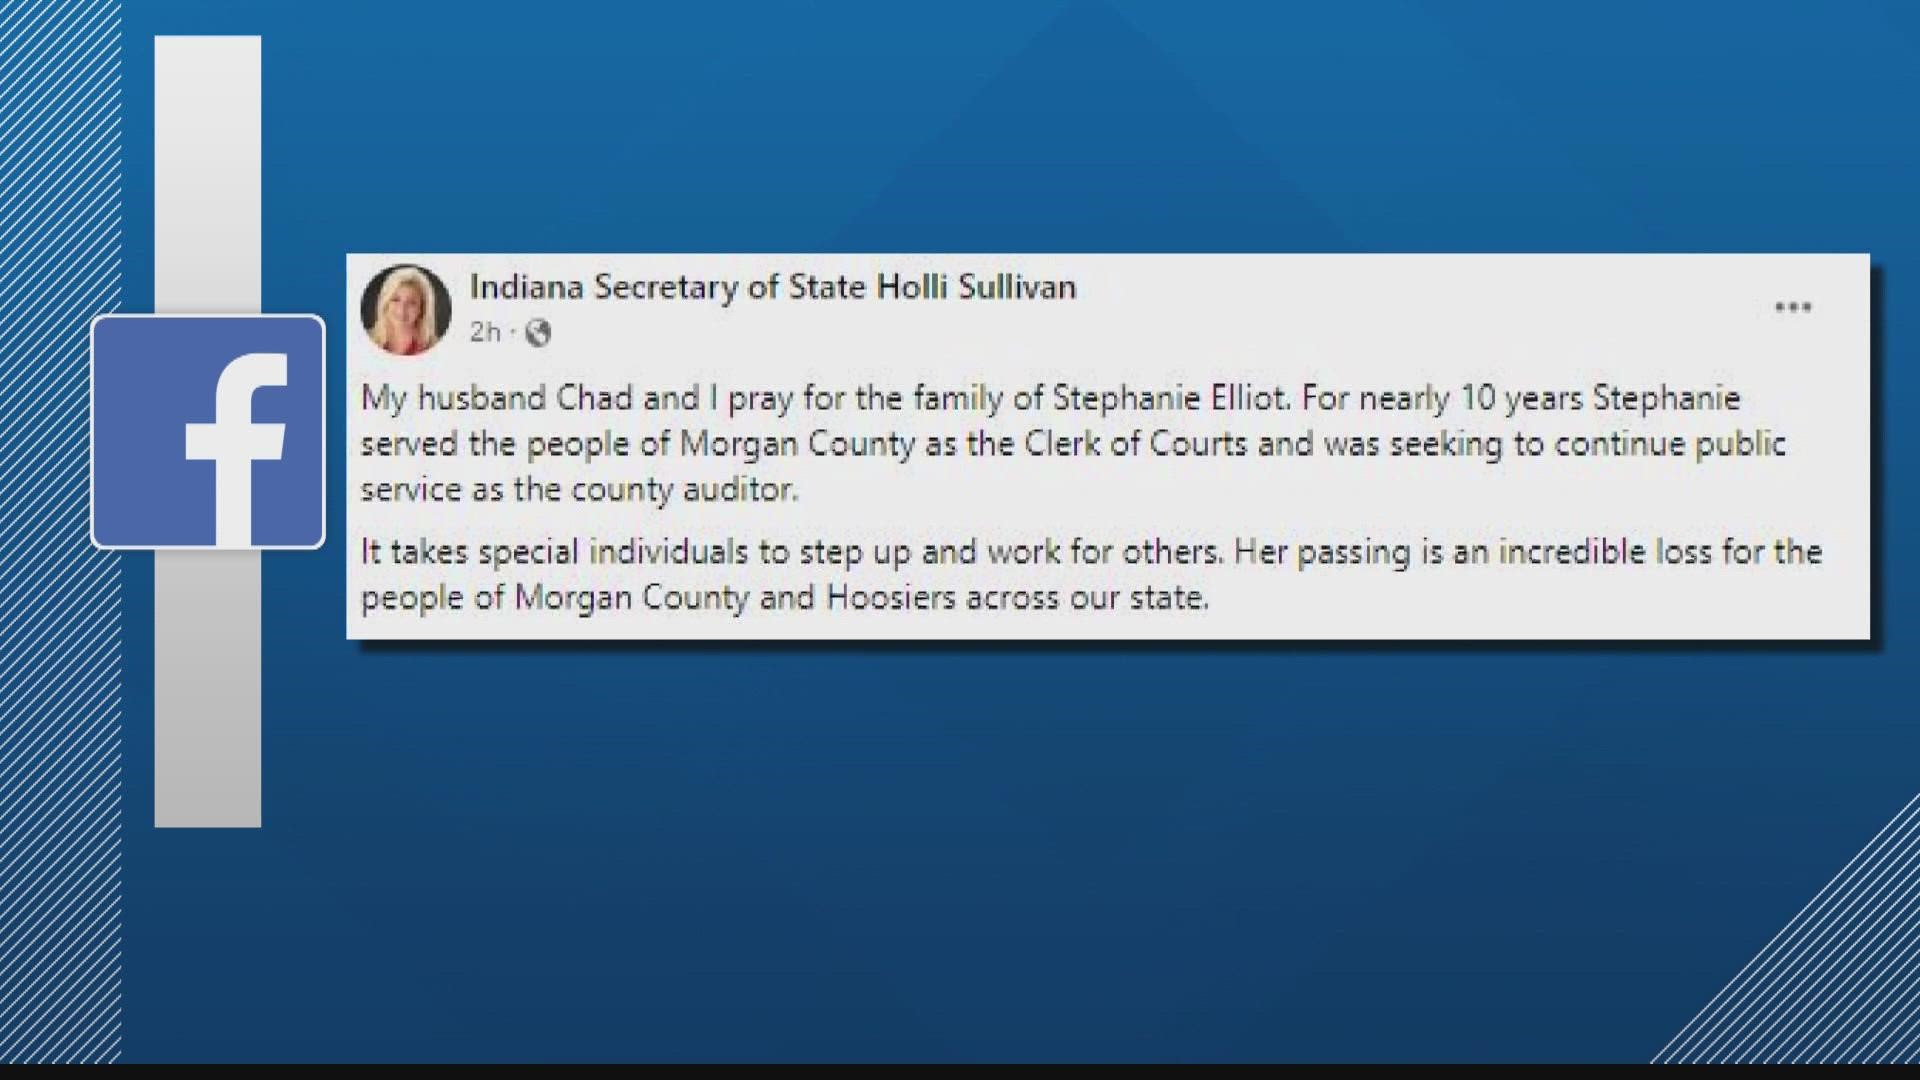 Indiana Secretary of State Holli Sullivan offered her condolences after Morgan County Clerk Stephanie Elliot died and her husband was critically injured in a crash.